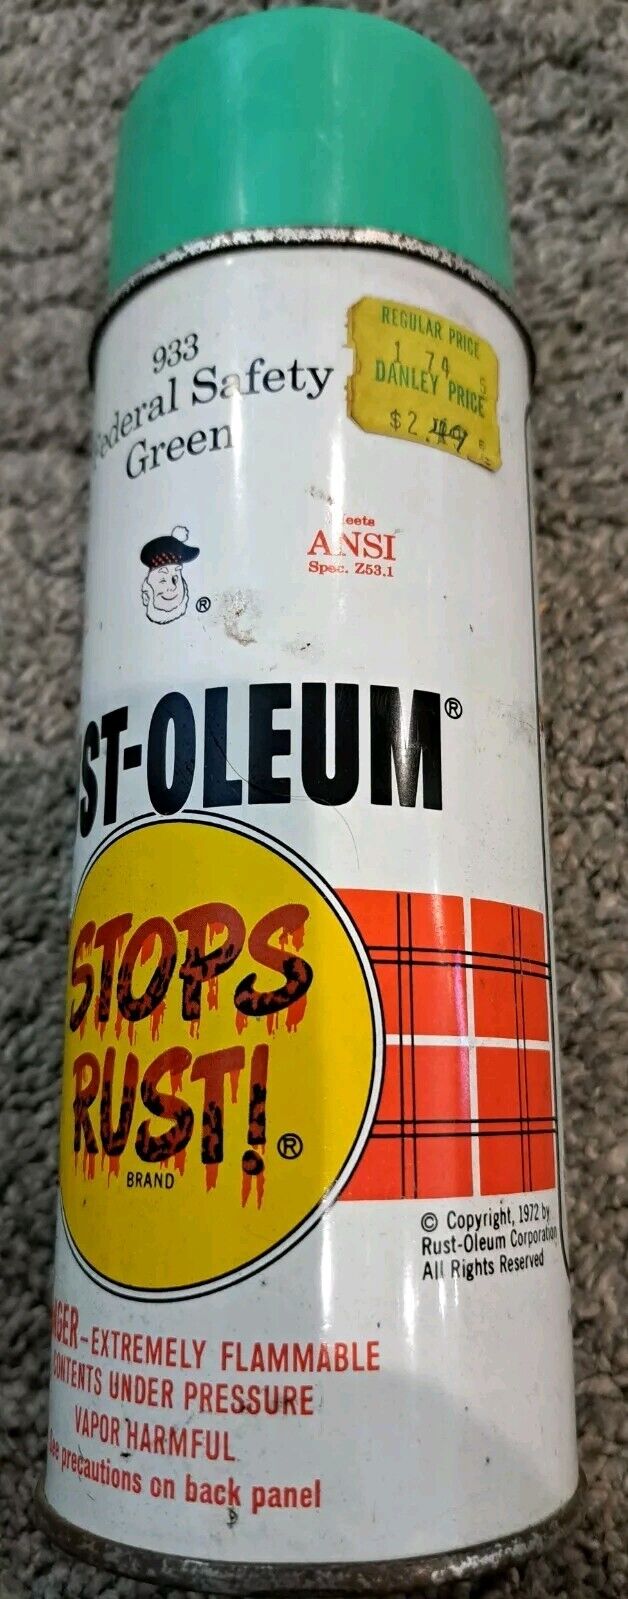 Vintage Rust-Oleum Federal Safety Green Spray Paint Can 933 1972